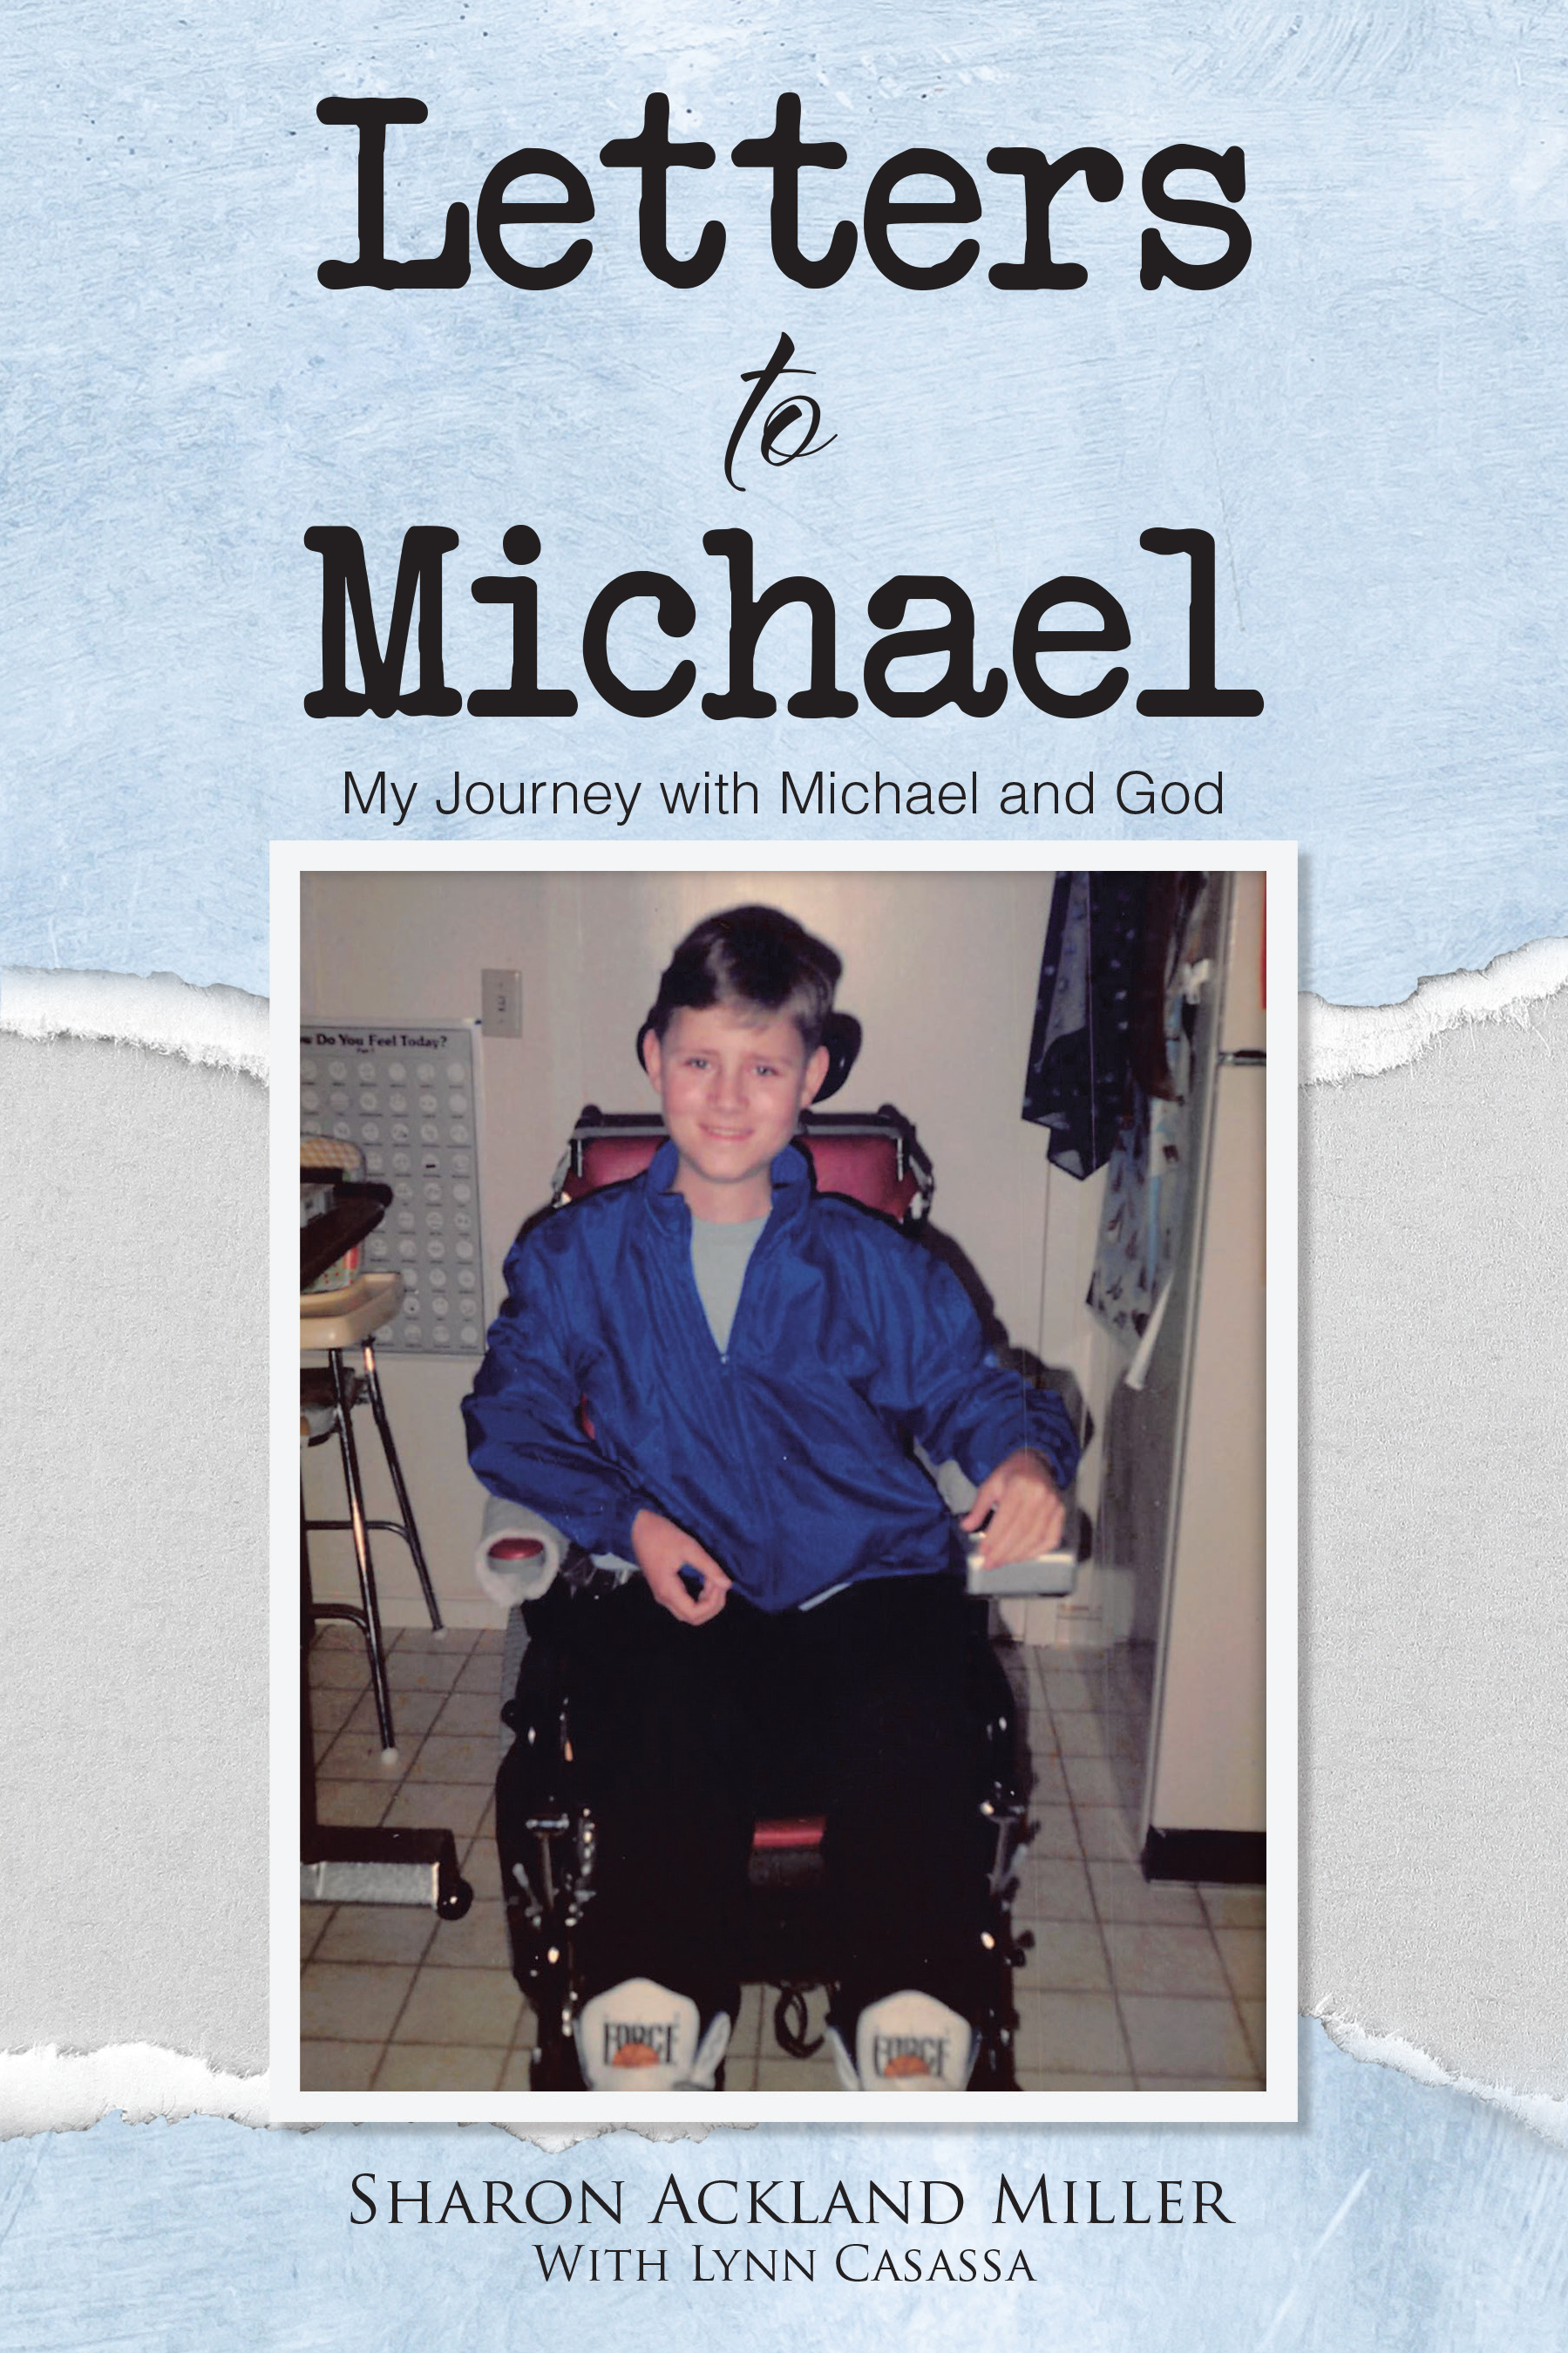 Sharon Ackland Miller with Lynn Casassa’s Newly Released "Letters to Michael: My Journey with Michael and God" is a Testament to Unconditional Love